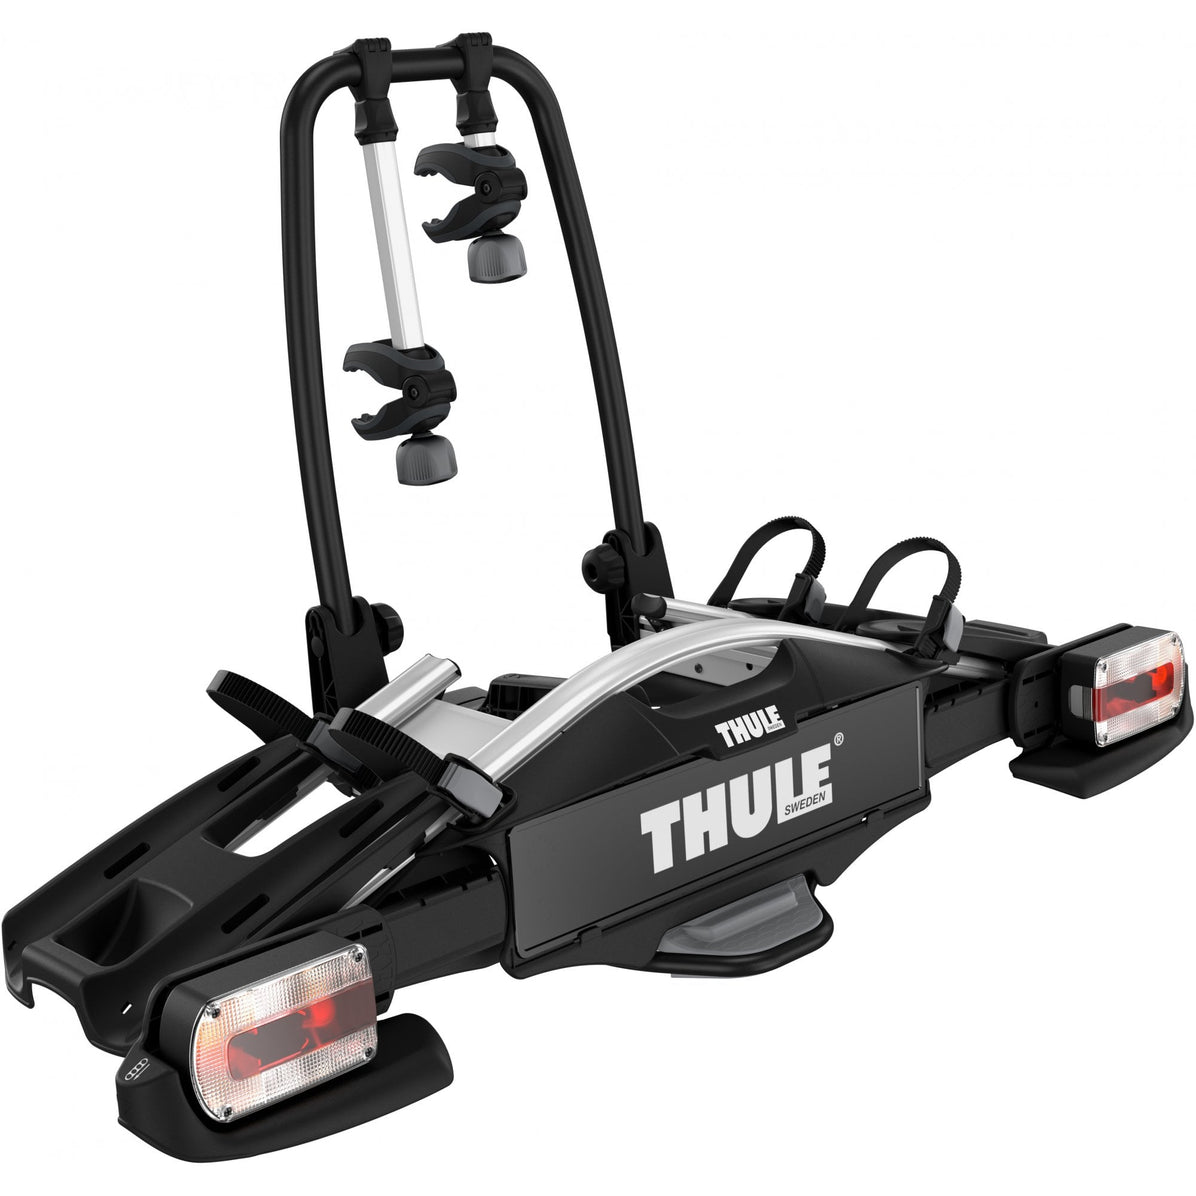 Thule 92501 VeloCompact 2-bike towball carrier - 7-pin